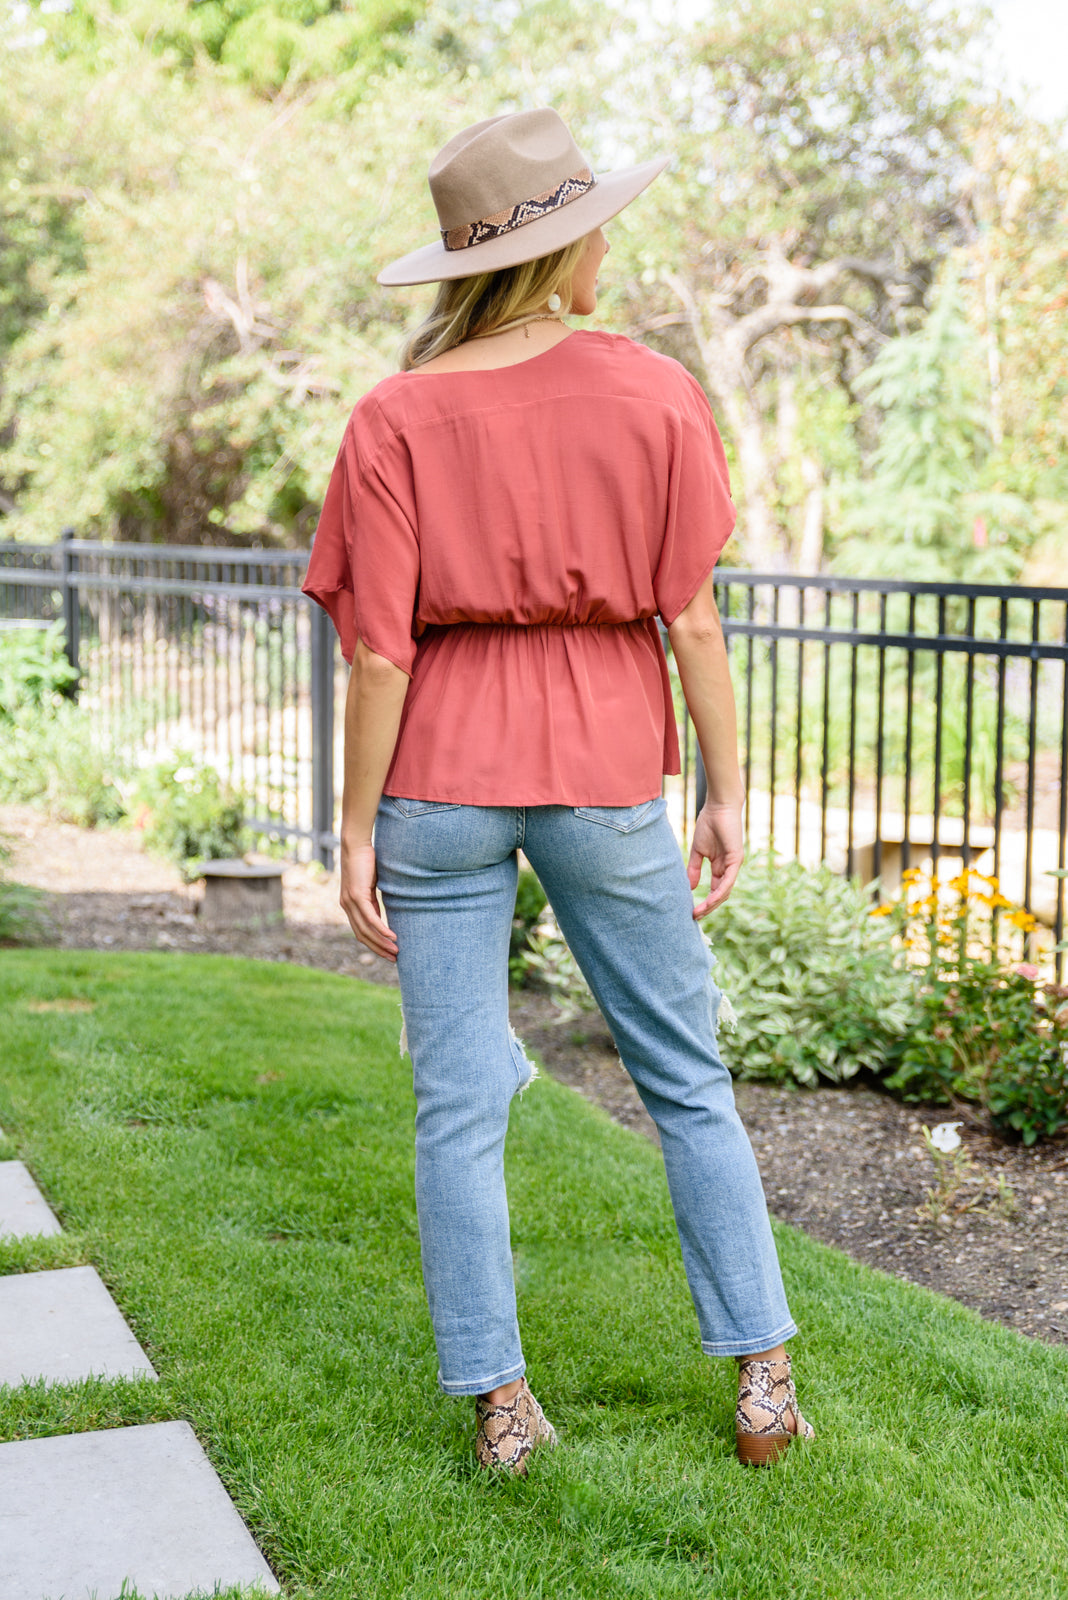 New On The Street Blouse